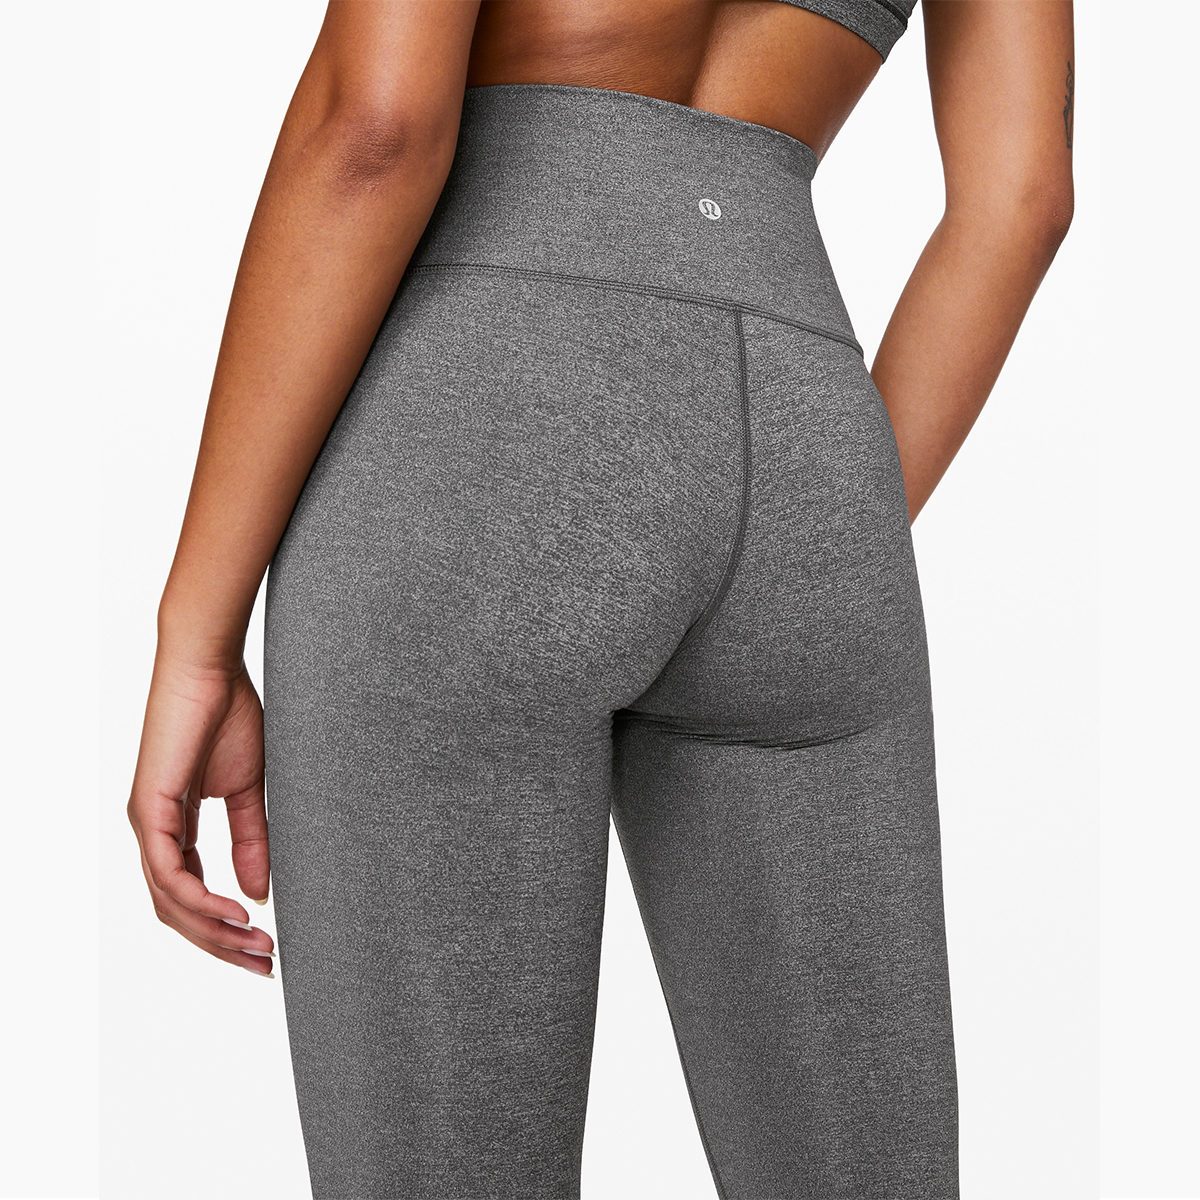 Lululemon Wunder Under High-Rise Tight 25 *Full-On Luxtreme Rustic Cora…